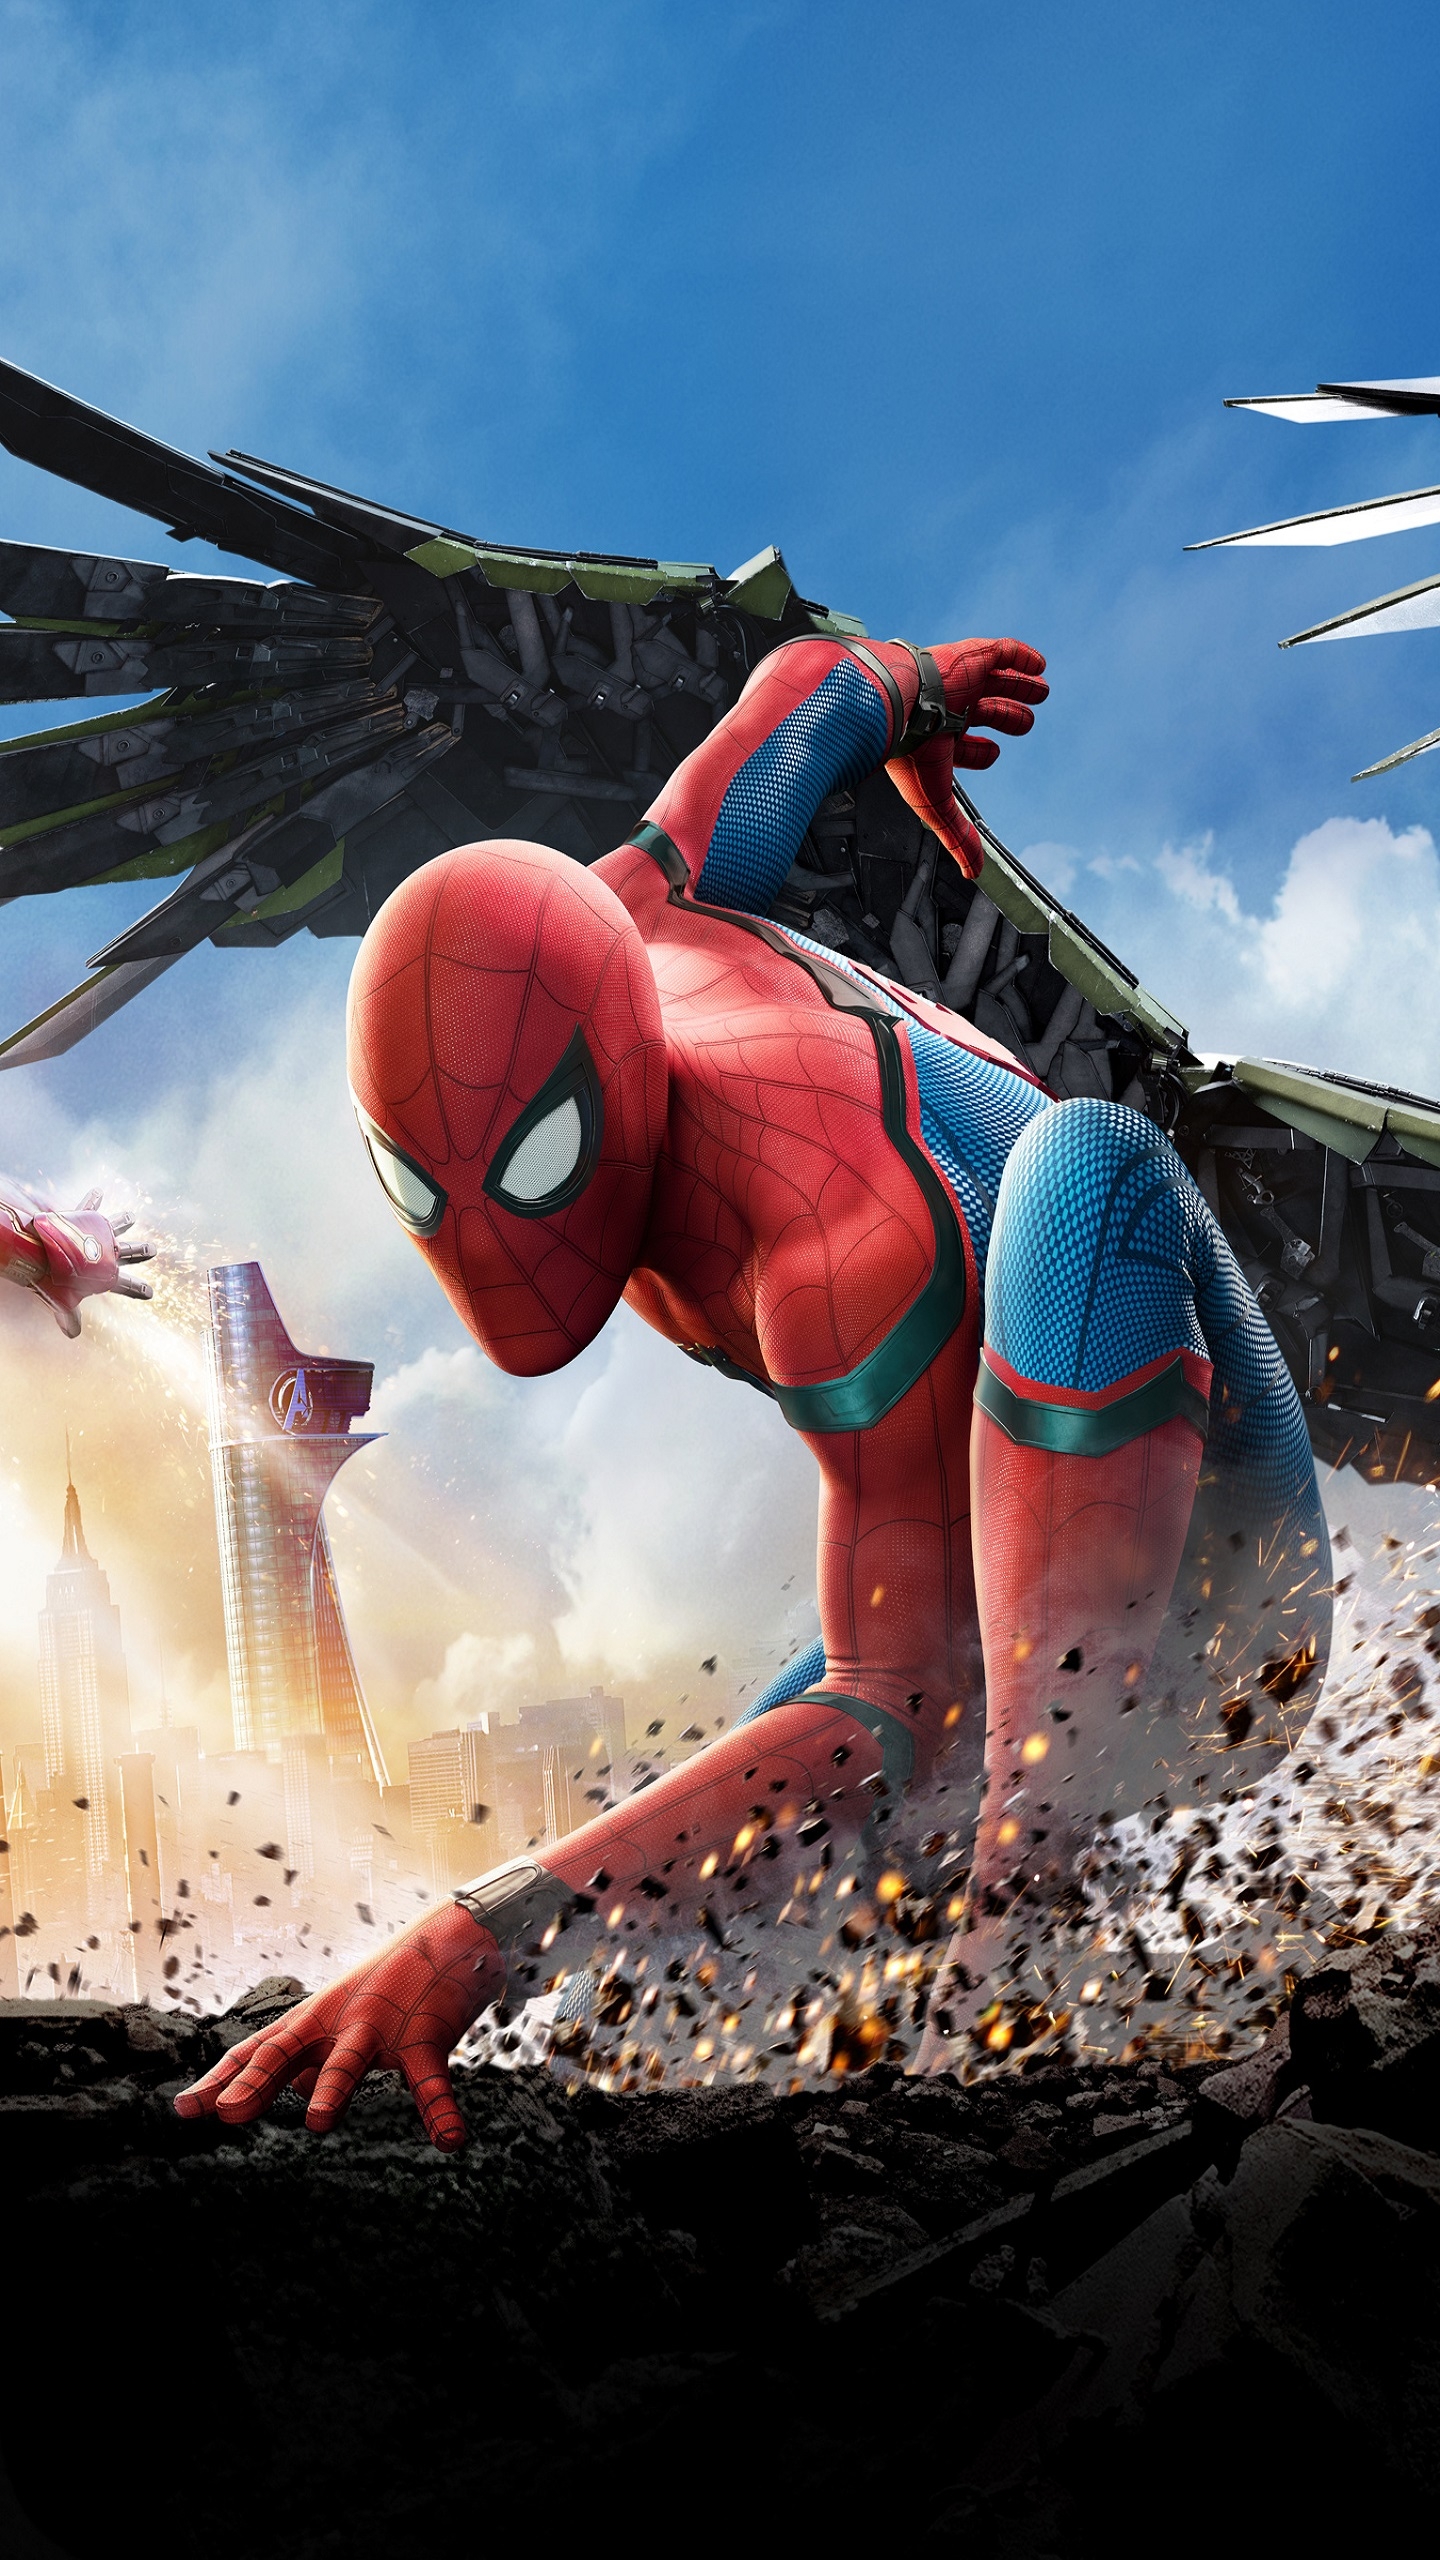 Spiderman Home Coming 2017 for Samsung S7 & S7 Edge resolution